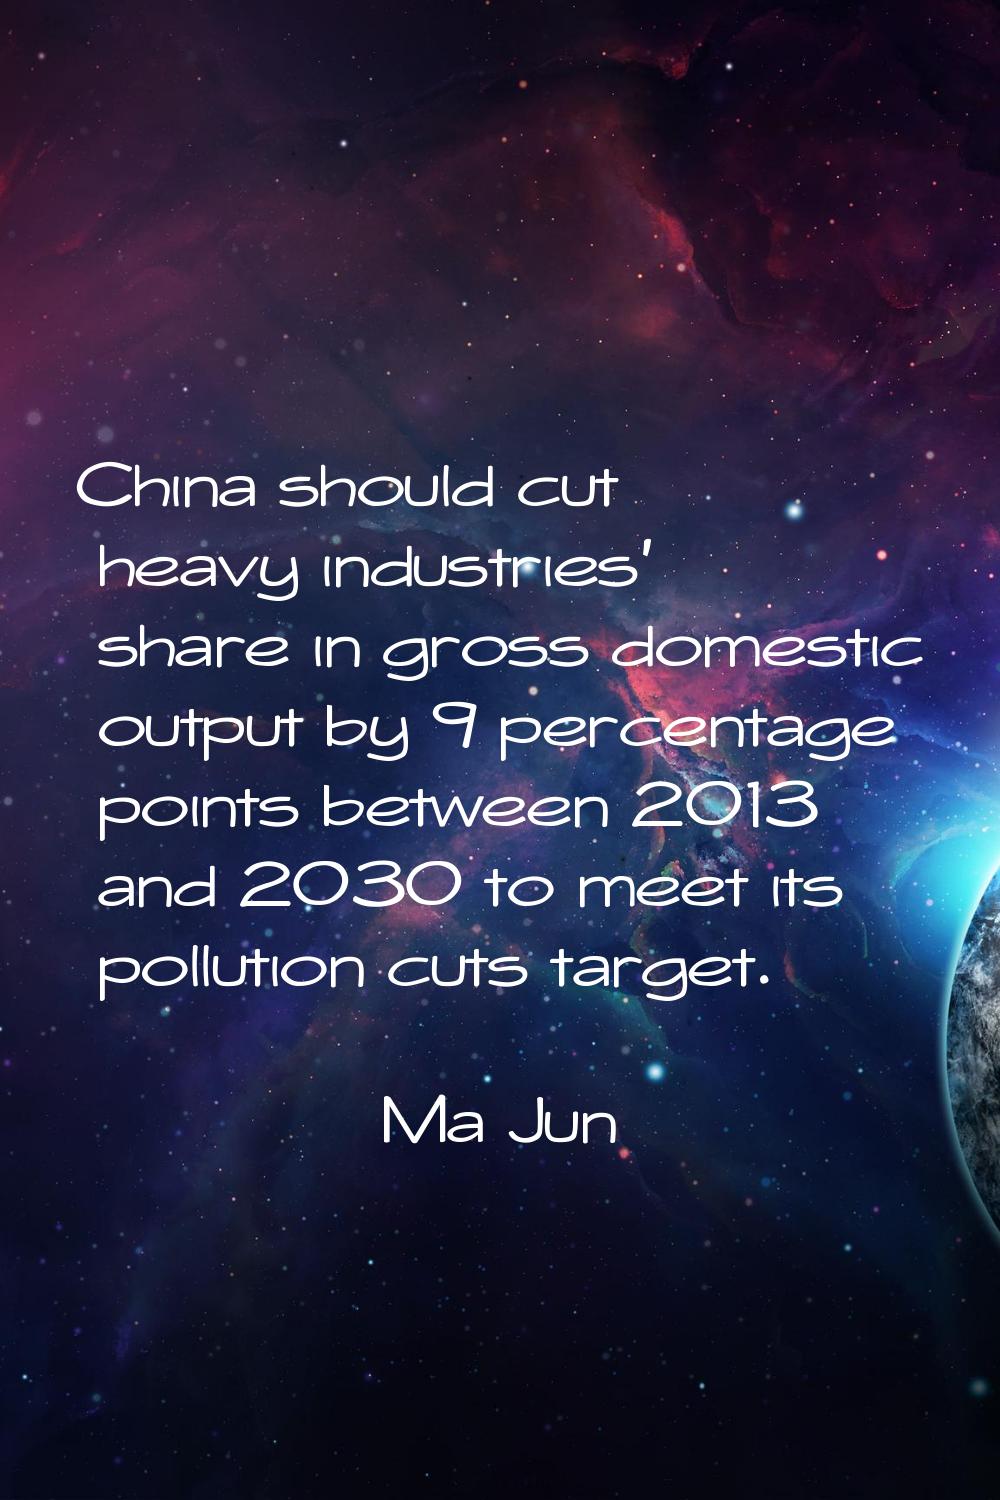 China should cut heavy industries' share in gross domestic output by 9 percentage points between 20